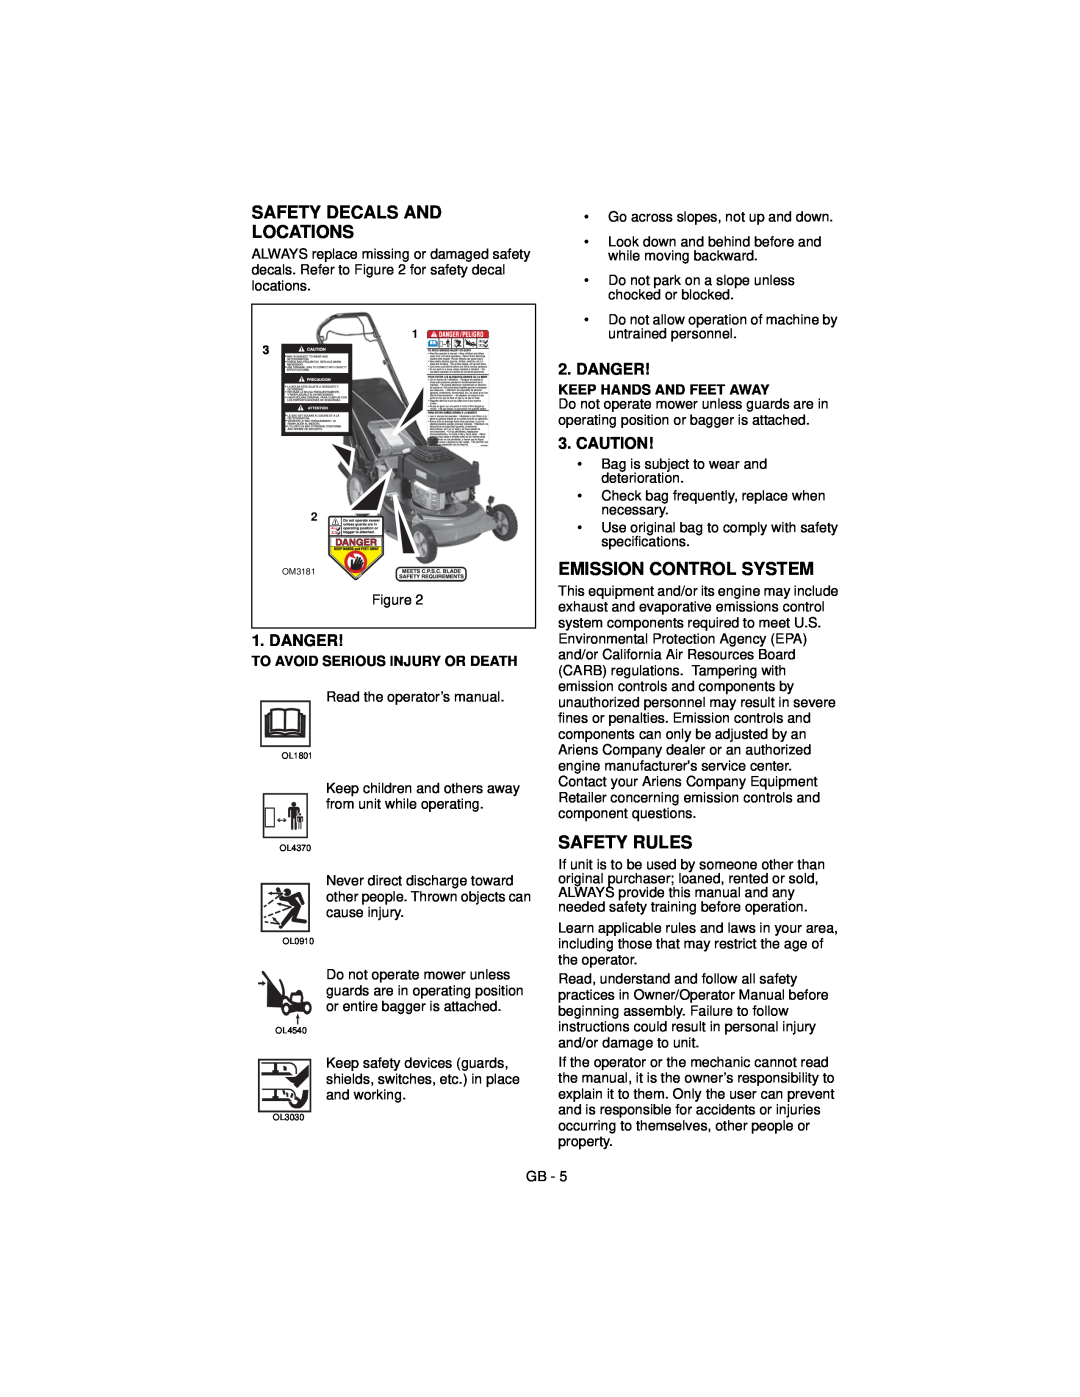 Ariens 911194 warranty Safety Decals And Locations, Emission Control System, Safety Rules, To Avoid Serious Injury Or Death 